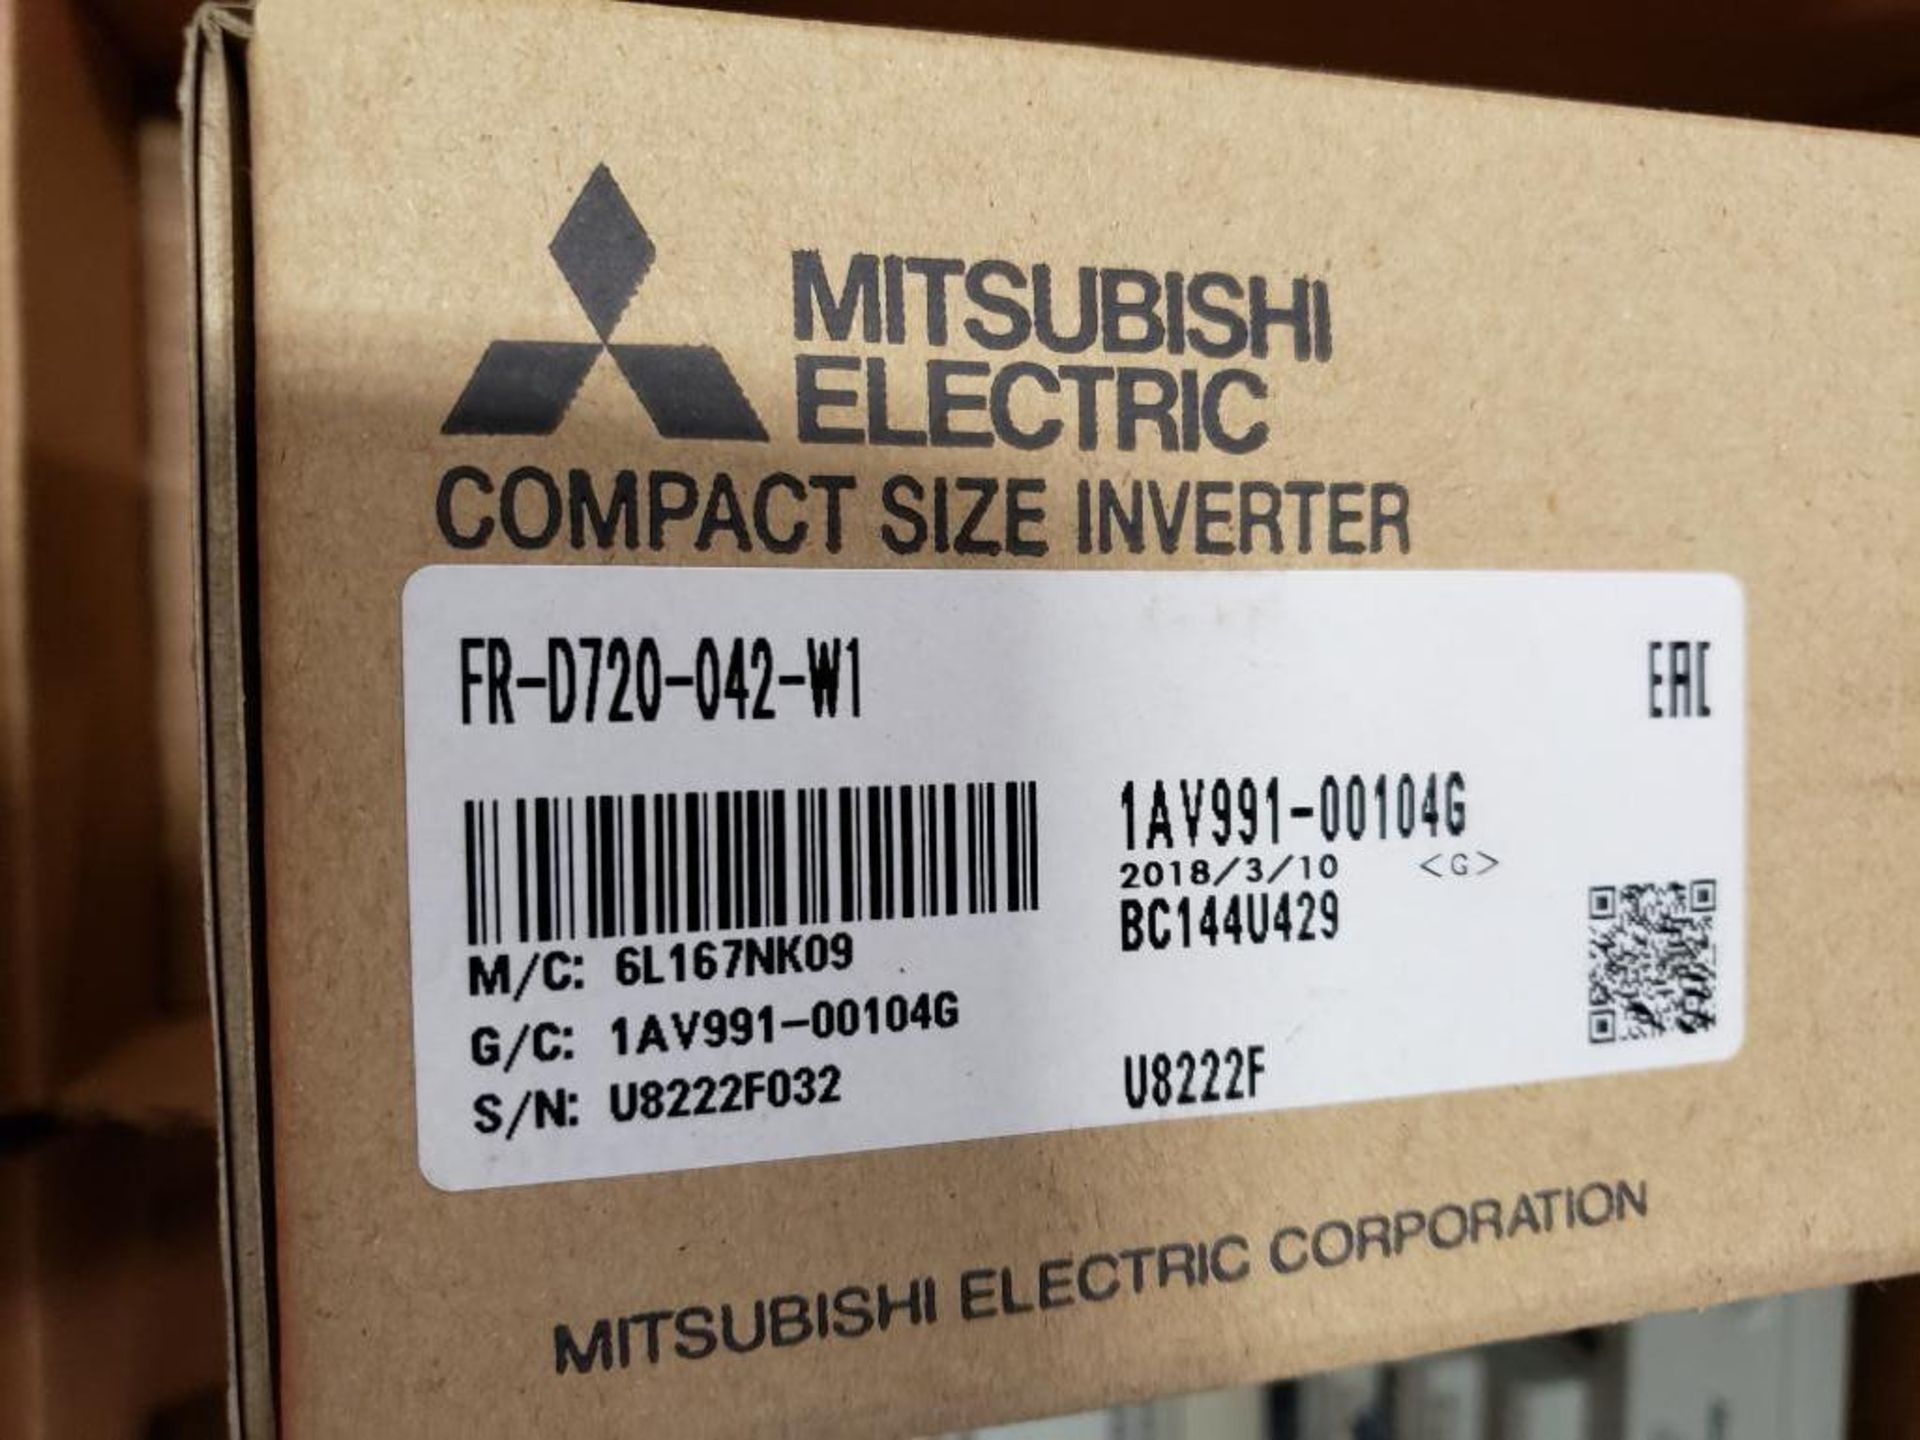 Mitsubishi Electric FR-D720-042-W1 compact size inverter. New in box. - Image 2 of 3